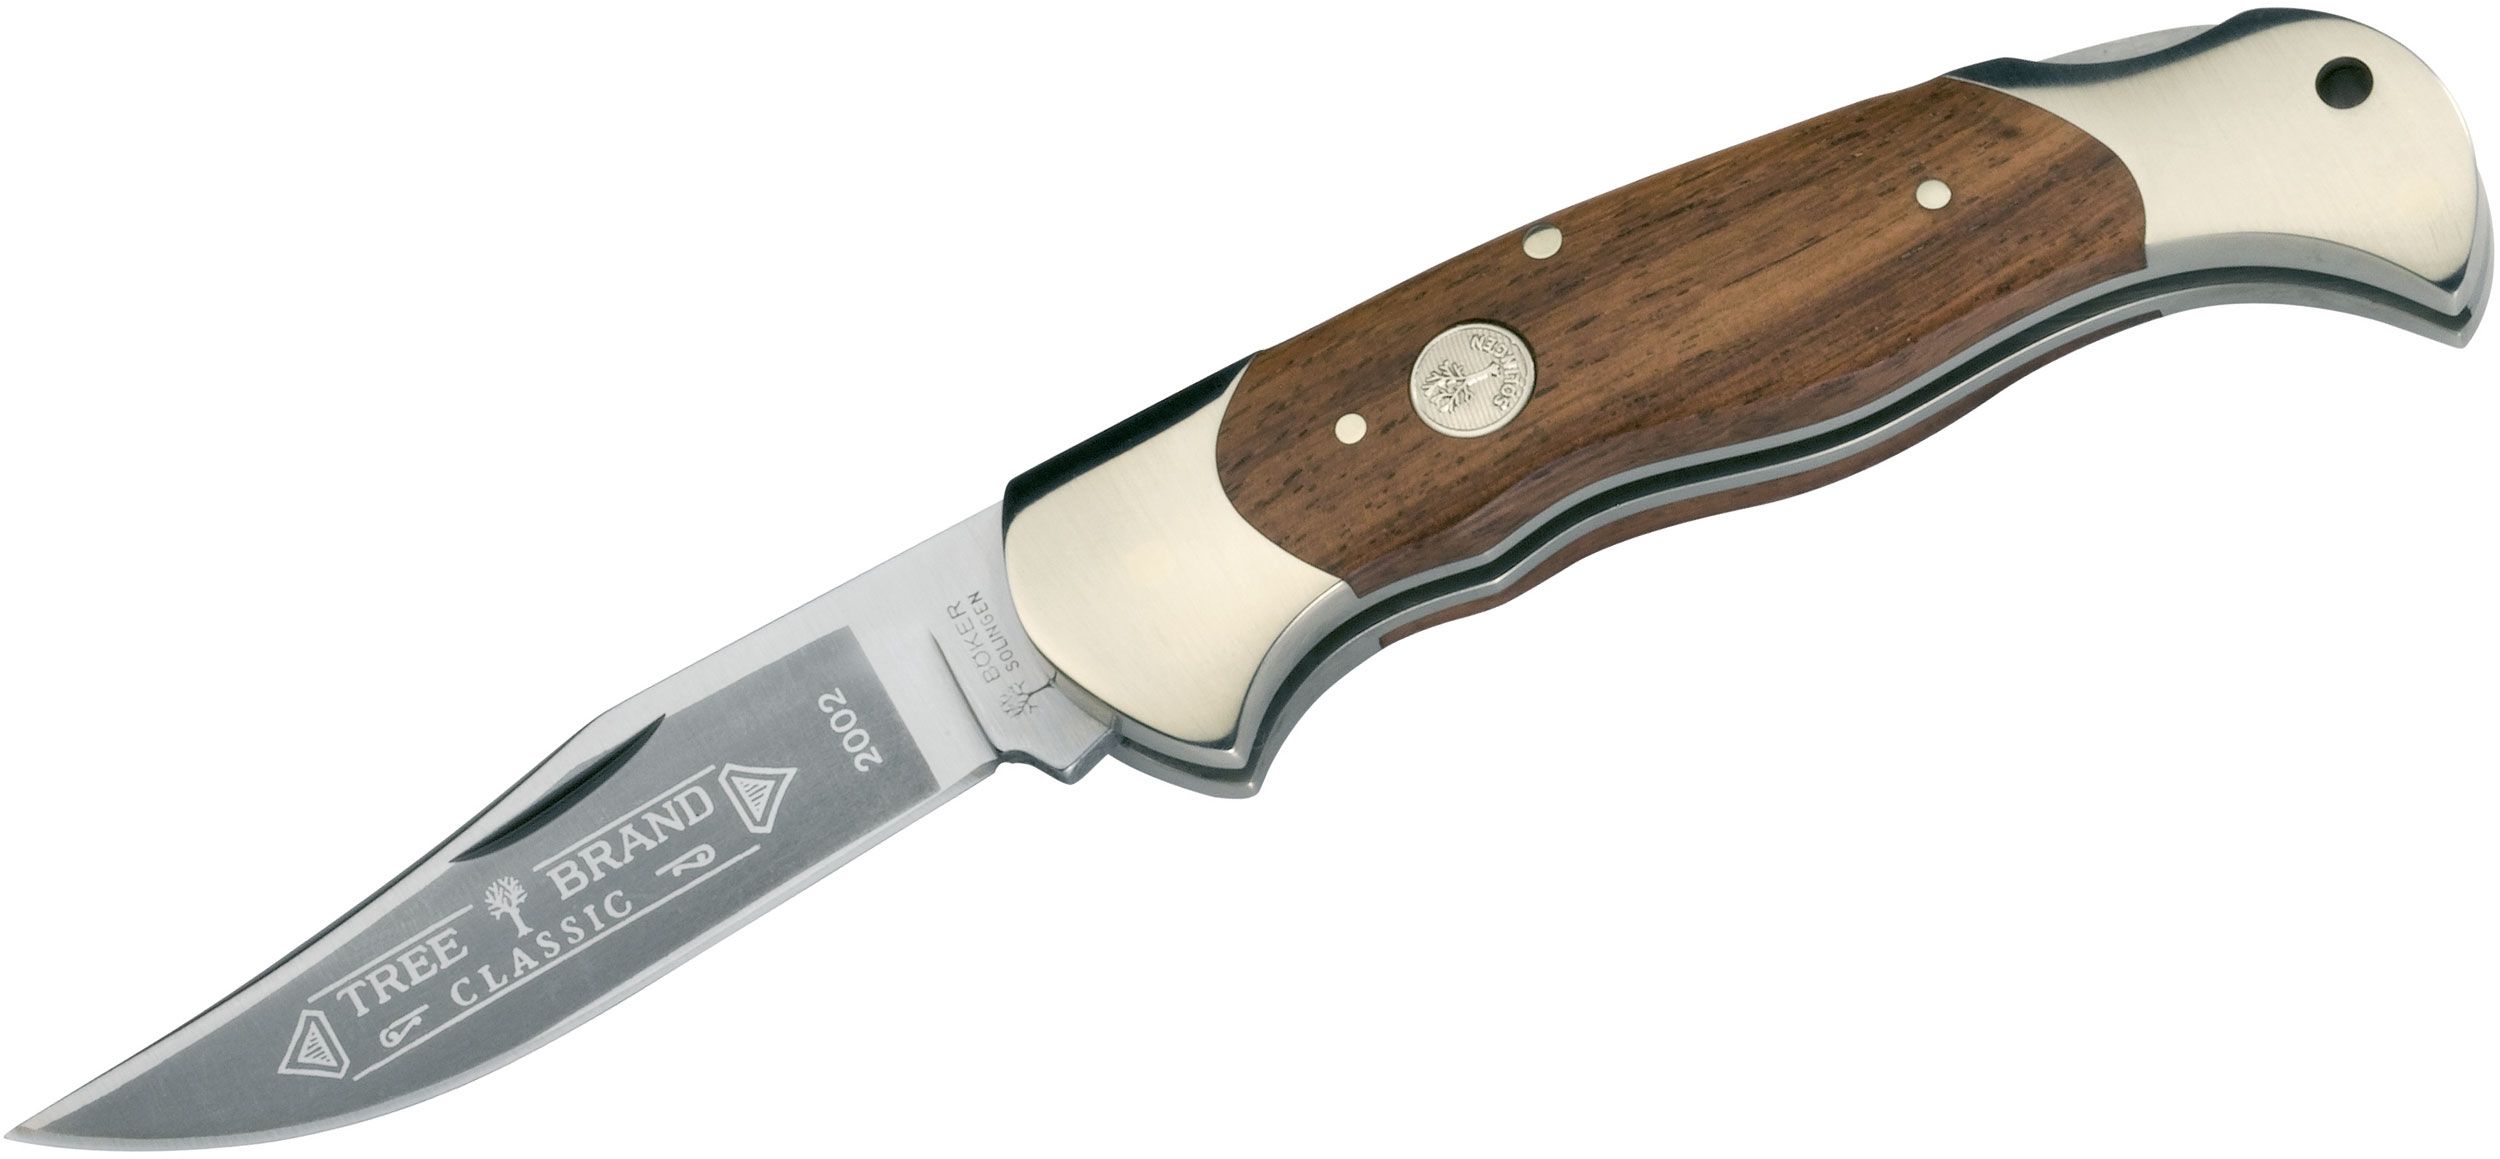 Boker Knife 112002 440-C blade and Rosewood handle Classic Folding